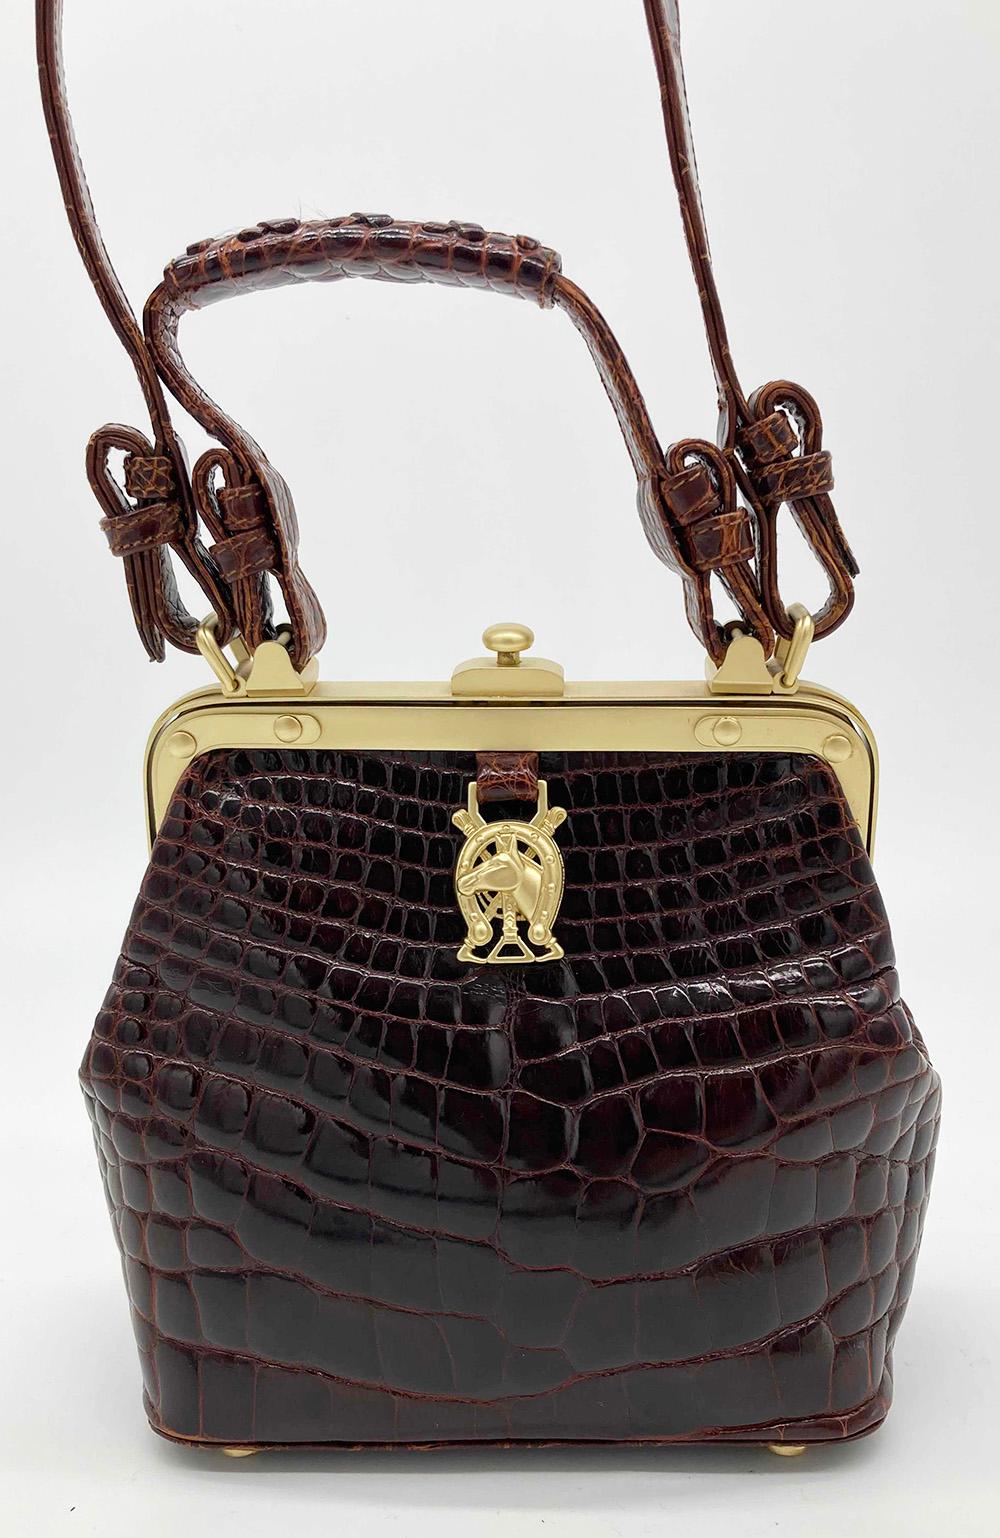 Barry Kieselstein Cord Brown Alligator Horseshoe Handbag in excellent condition. Brown alligator exterior trimmed with matte gold hardware and removable matching alligator shoulder strap. Button hinge closure opens to a green suede interior with two